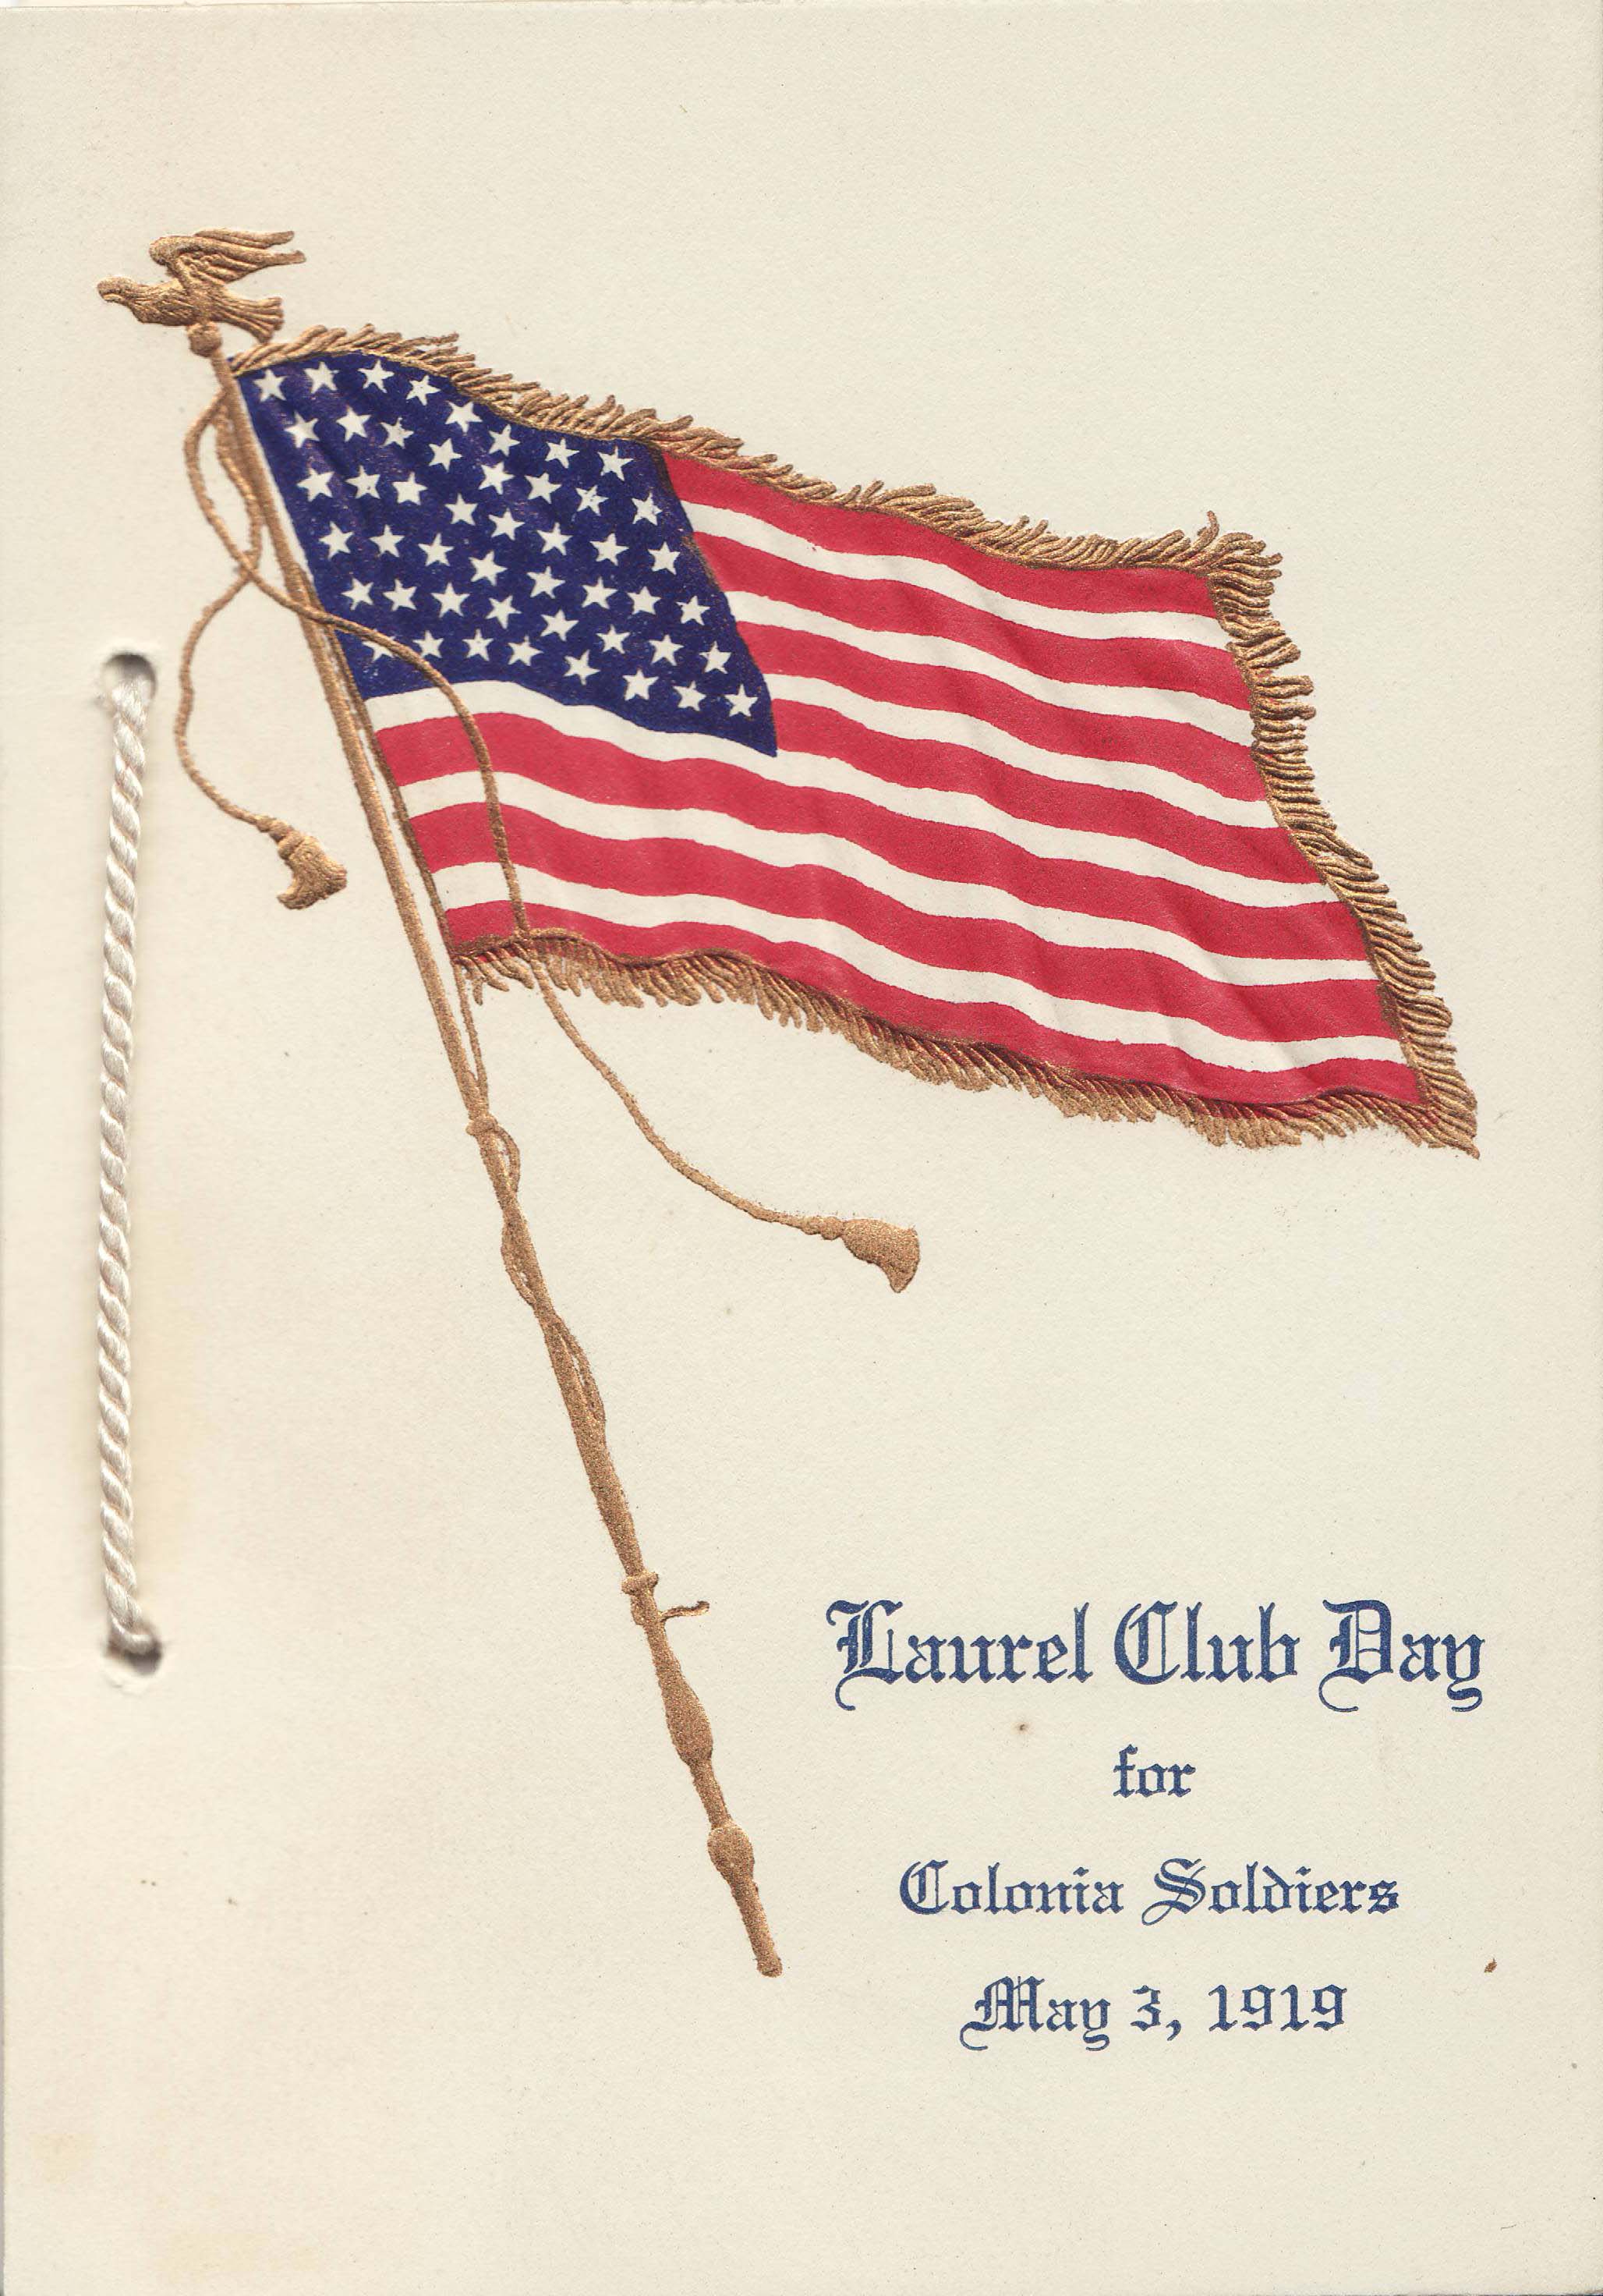 Booklet for the May 3, 1919 Laurel Club Day for veterans.  Image courtesy: Johnson & Johnson Archives.